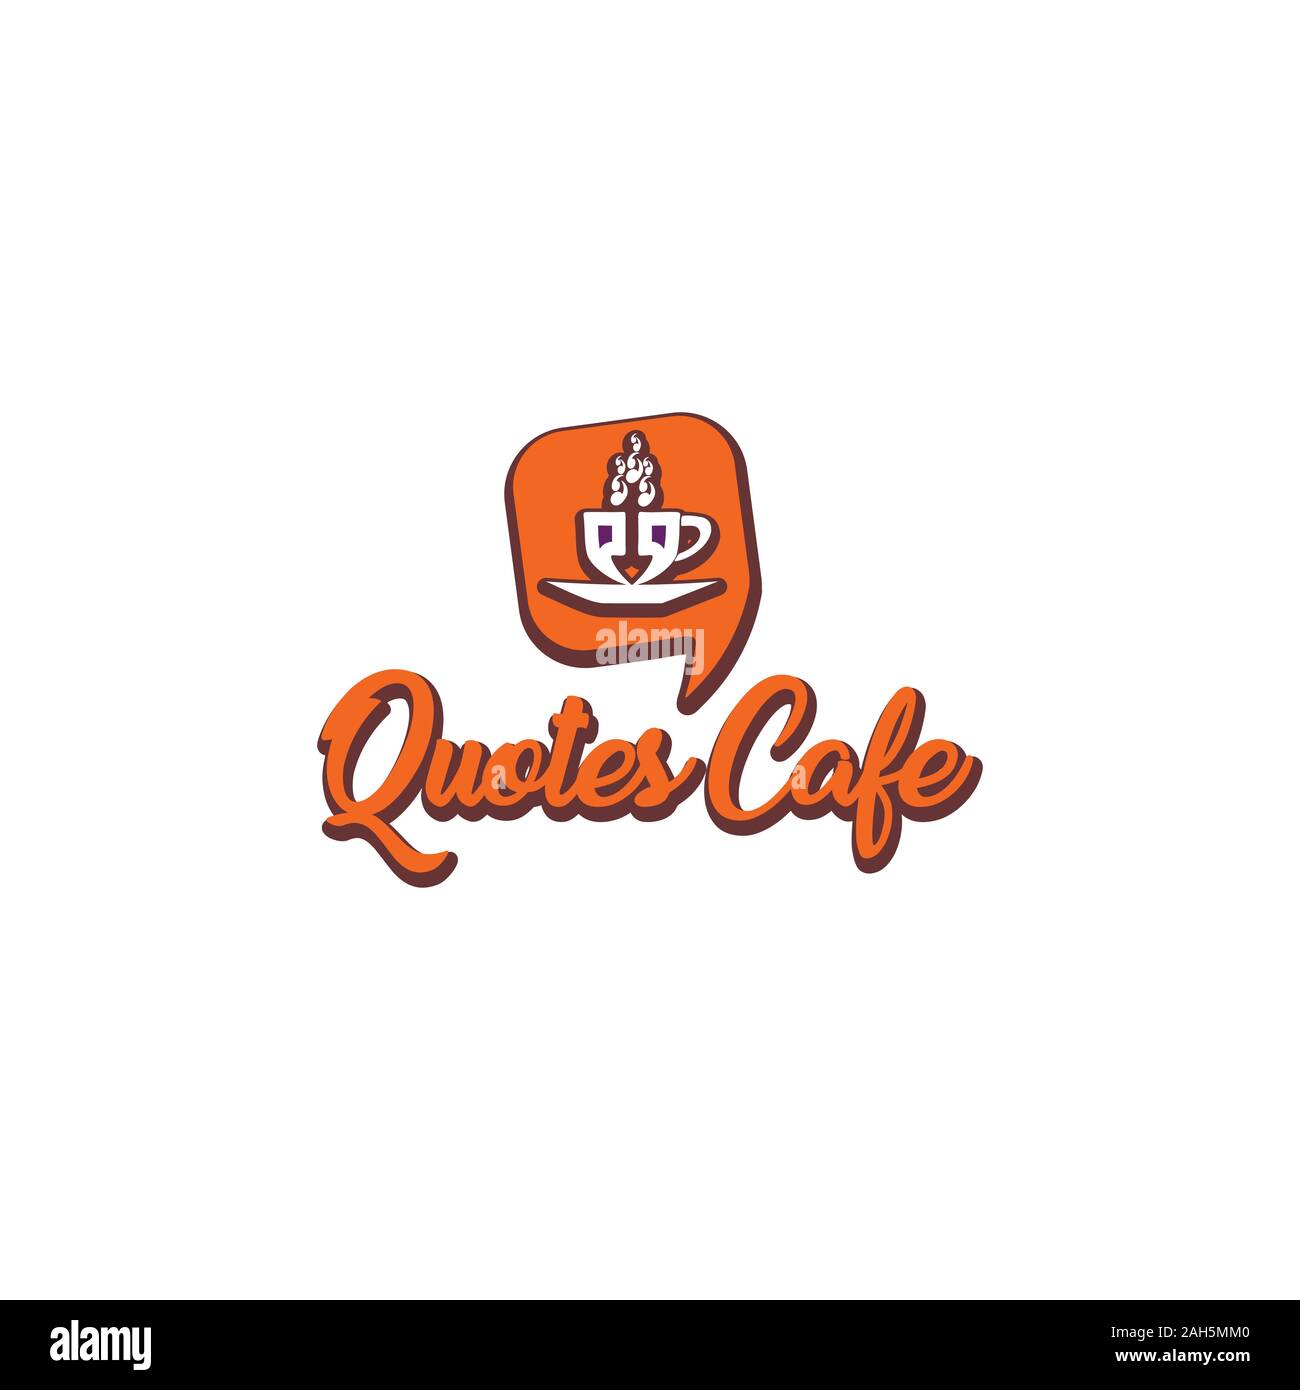 Quotes Cafe Logo Design Template, Call Out Logo Concept, Quotation Mark Element, Gray, Orange, Coffee Cup Icon Stock Vector